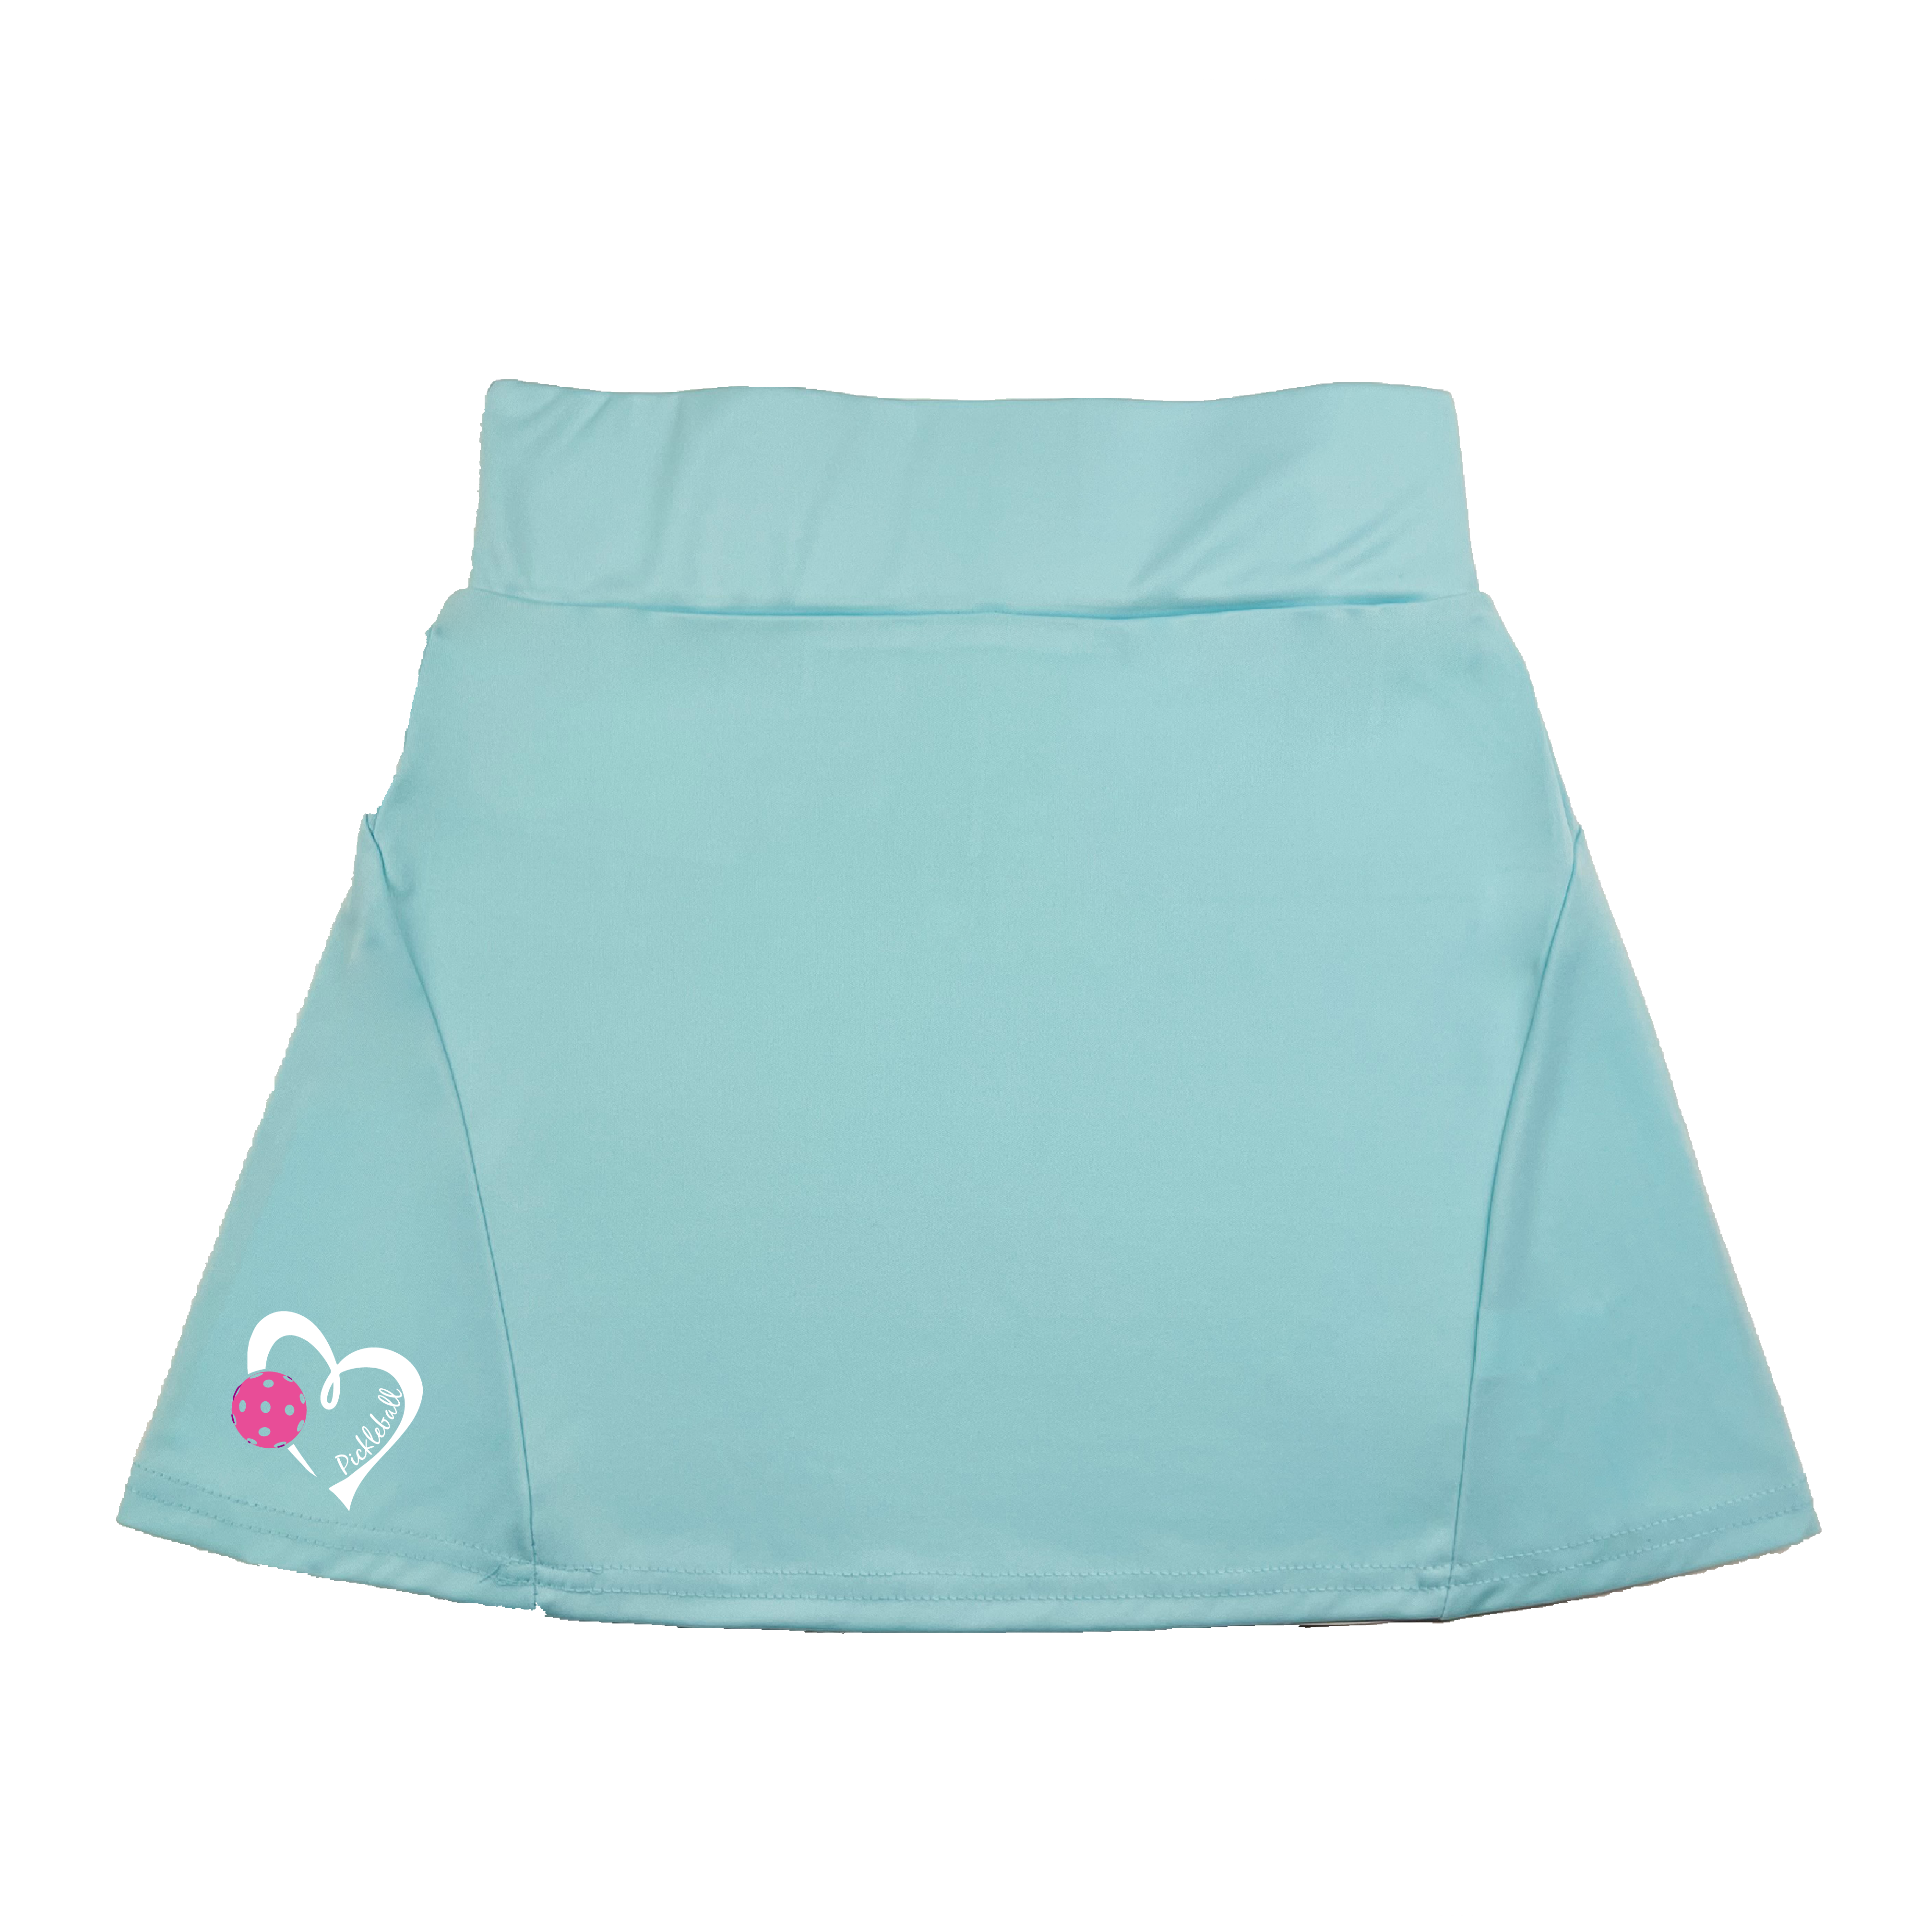 Pickleball Flirty Skort Design:  Pickleball Love with Heart - Pink  These flirty skorts have a flat mid-rise waistband with a 3 inch waistband.  Light weight without being see through and the material wicks away moisture quickly.  Flirty pleats in the back with inner shorts for free movement and stylish coverage on the courts.  A functional zipper pocket on the back and two built in pockets on the shorts for convenient storage. 